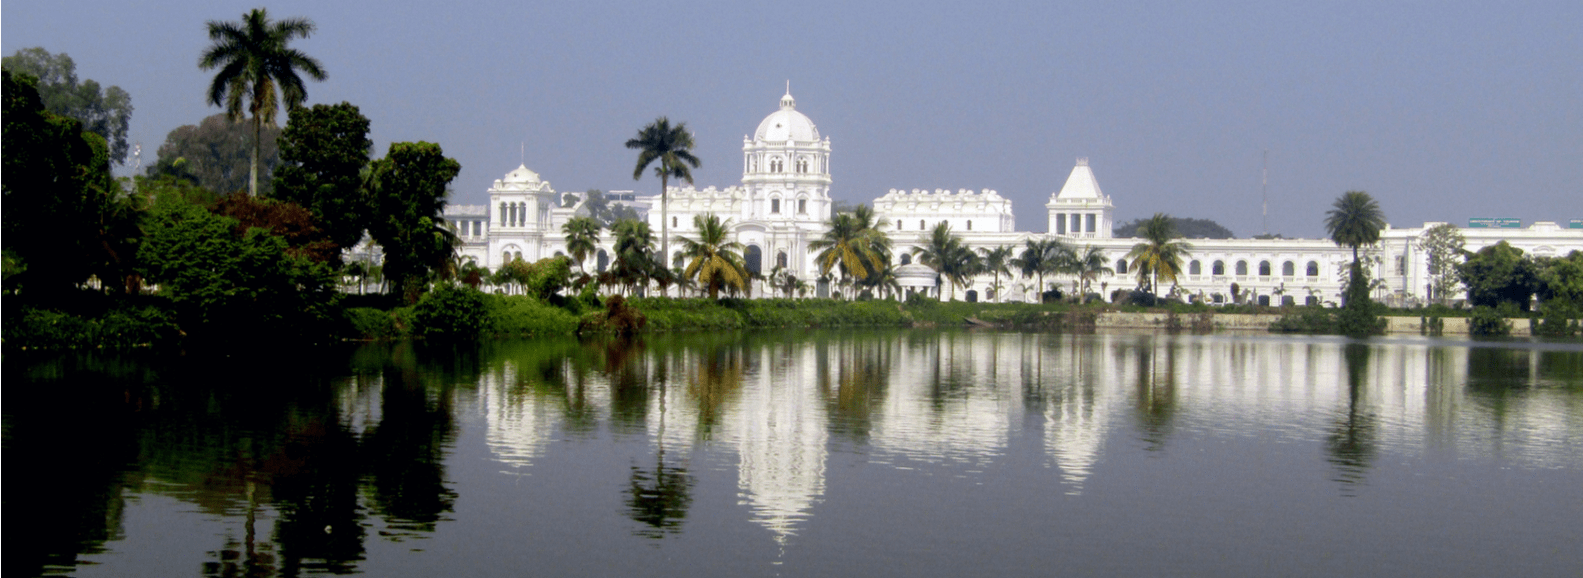 Tripura government museum with view of lake & trees is located in Agartala